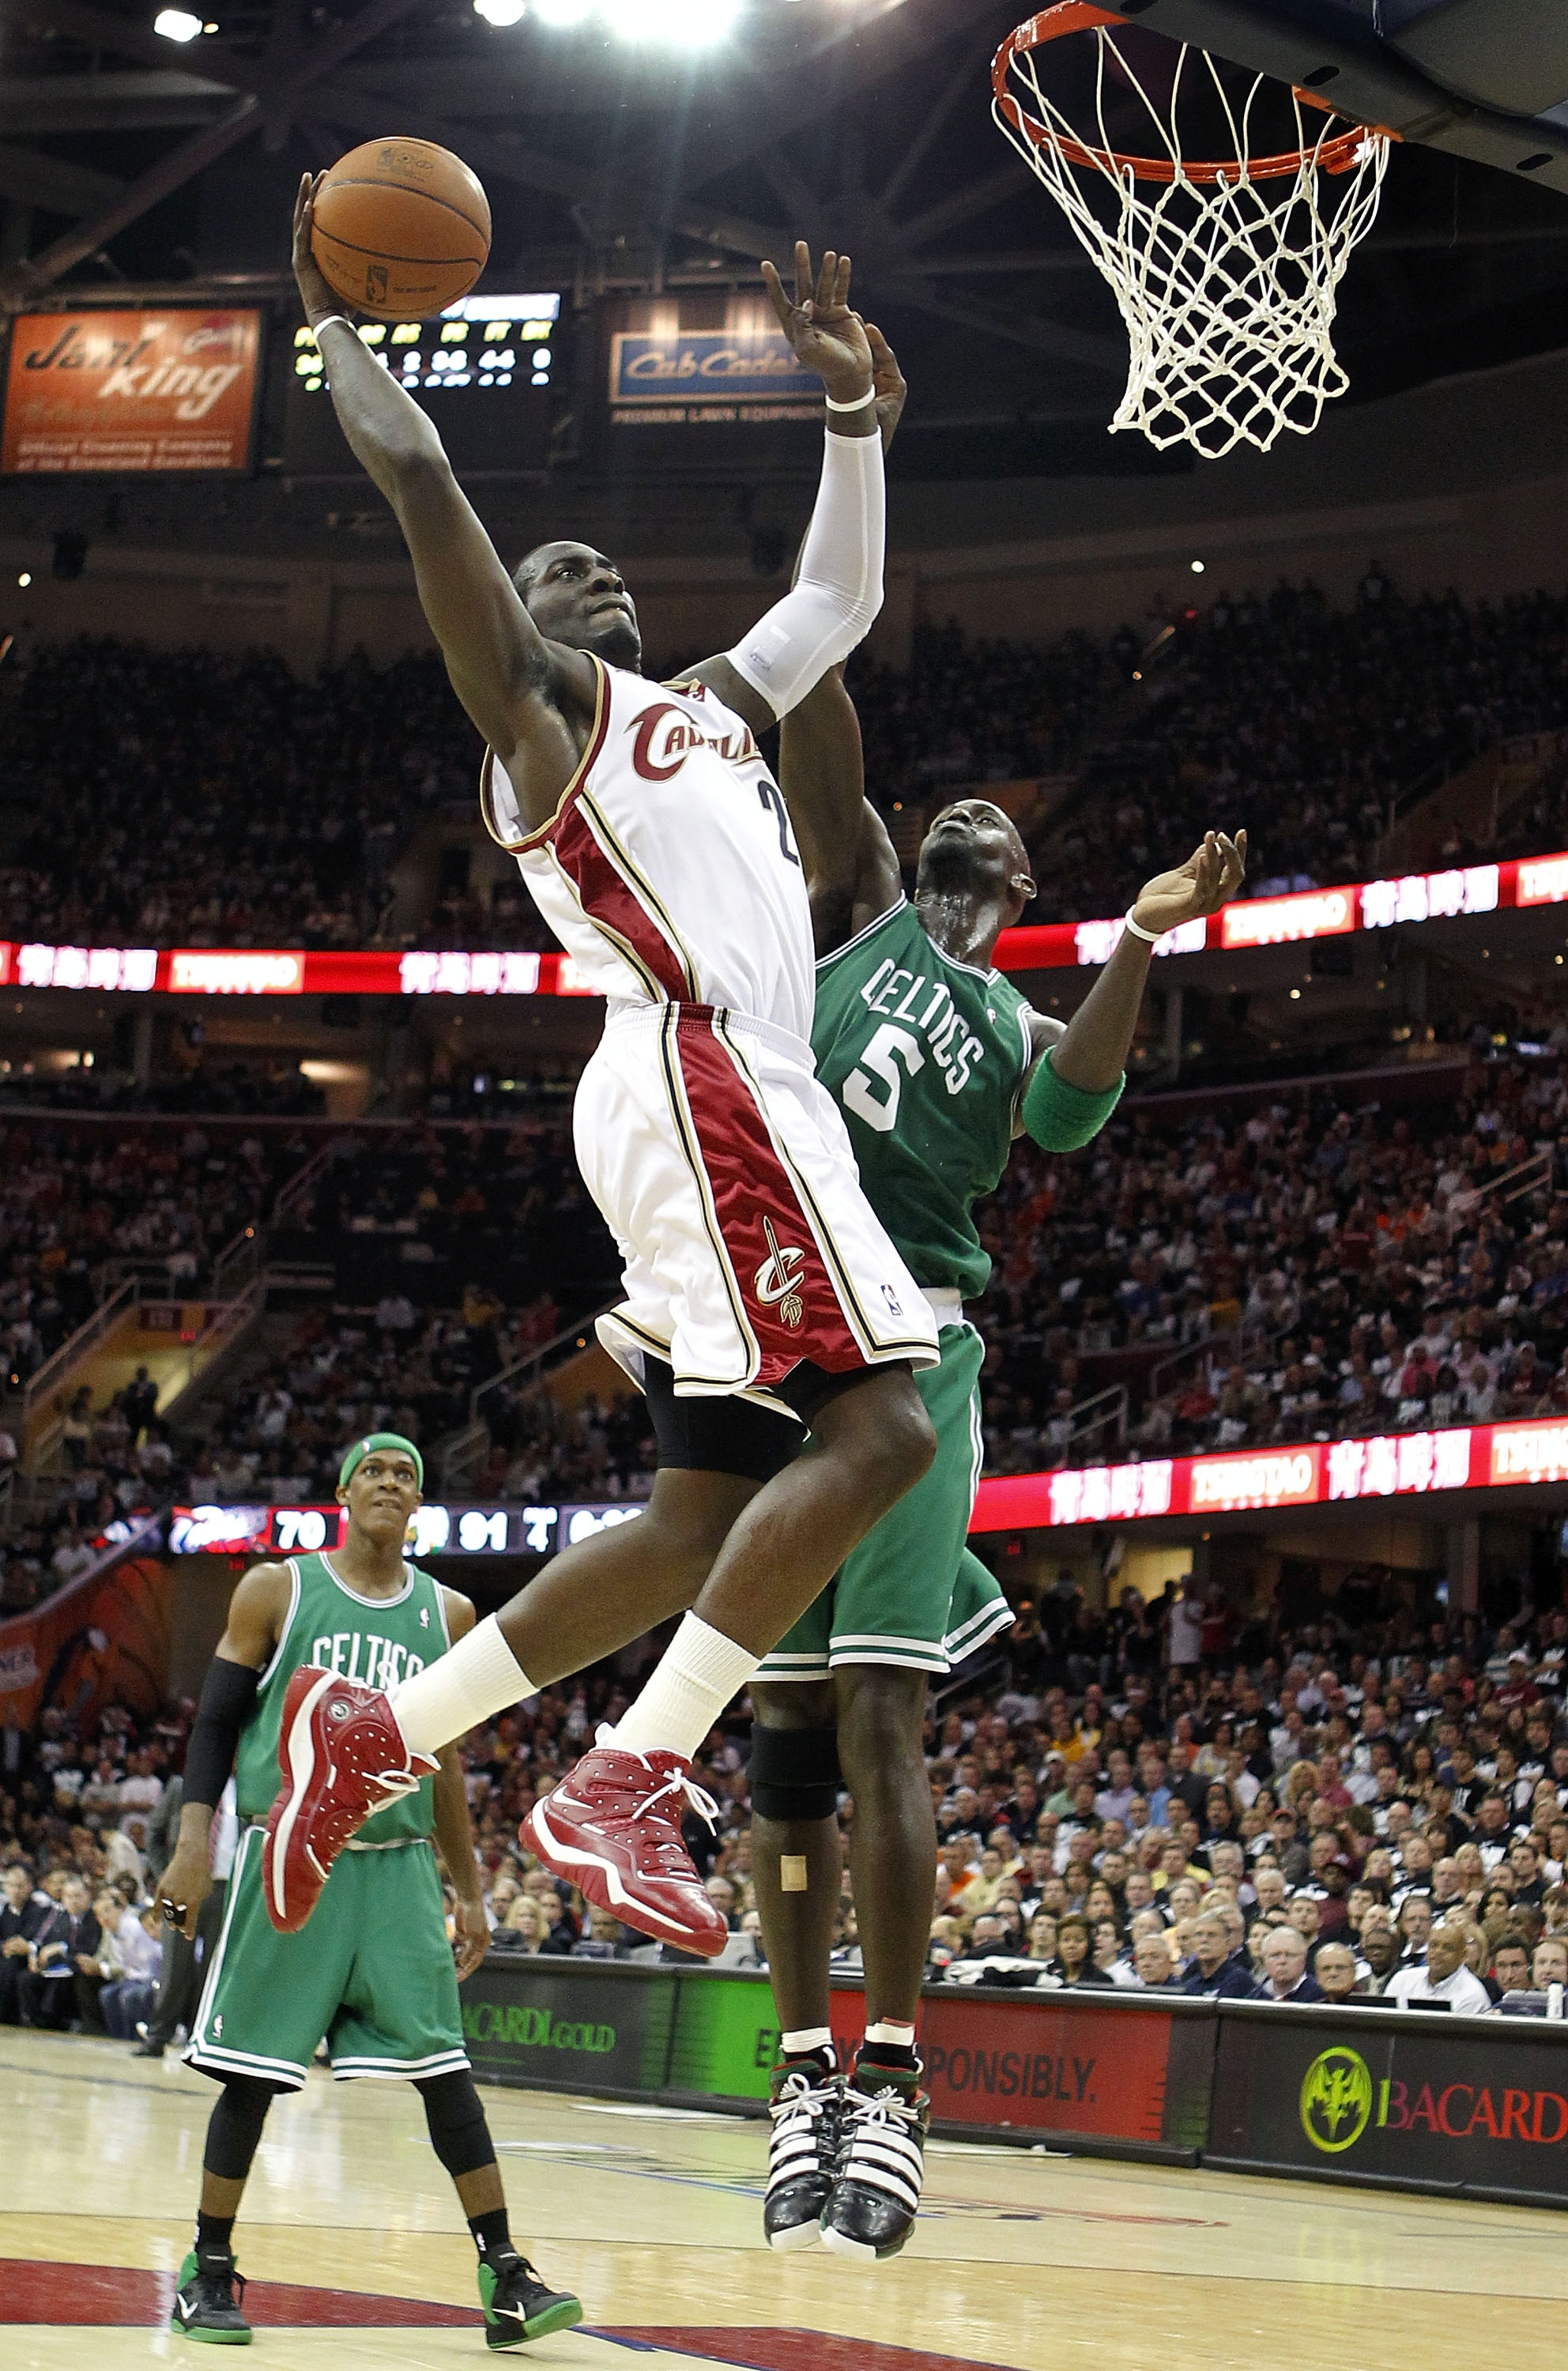 CLEVELAND - MAY 03:  J.J. Hickson #21 of the Cleveland Cavaliers gets in for a dunk past Kevin Garnett #5 of the Boston Celtics during Game Two of the Eastern Conference Semifinals during the 2010 NBA Playoffs at Quicken Loans Arena on May 3, 2010 in Clev